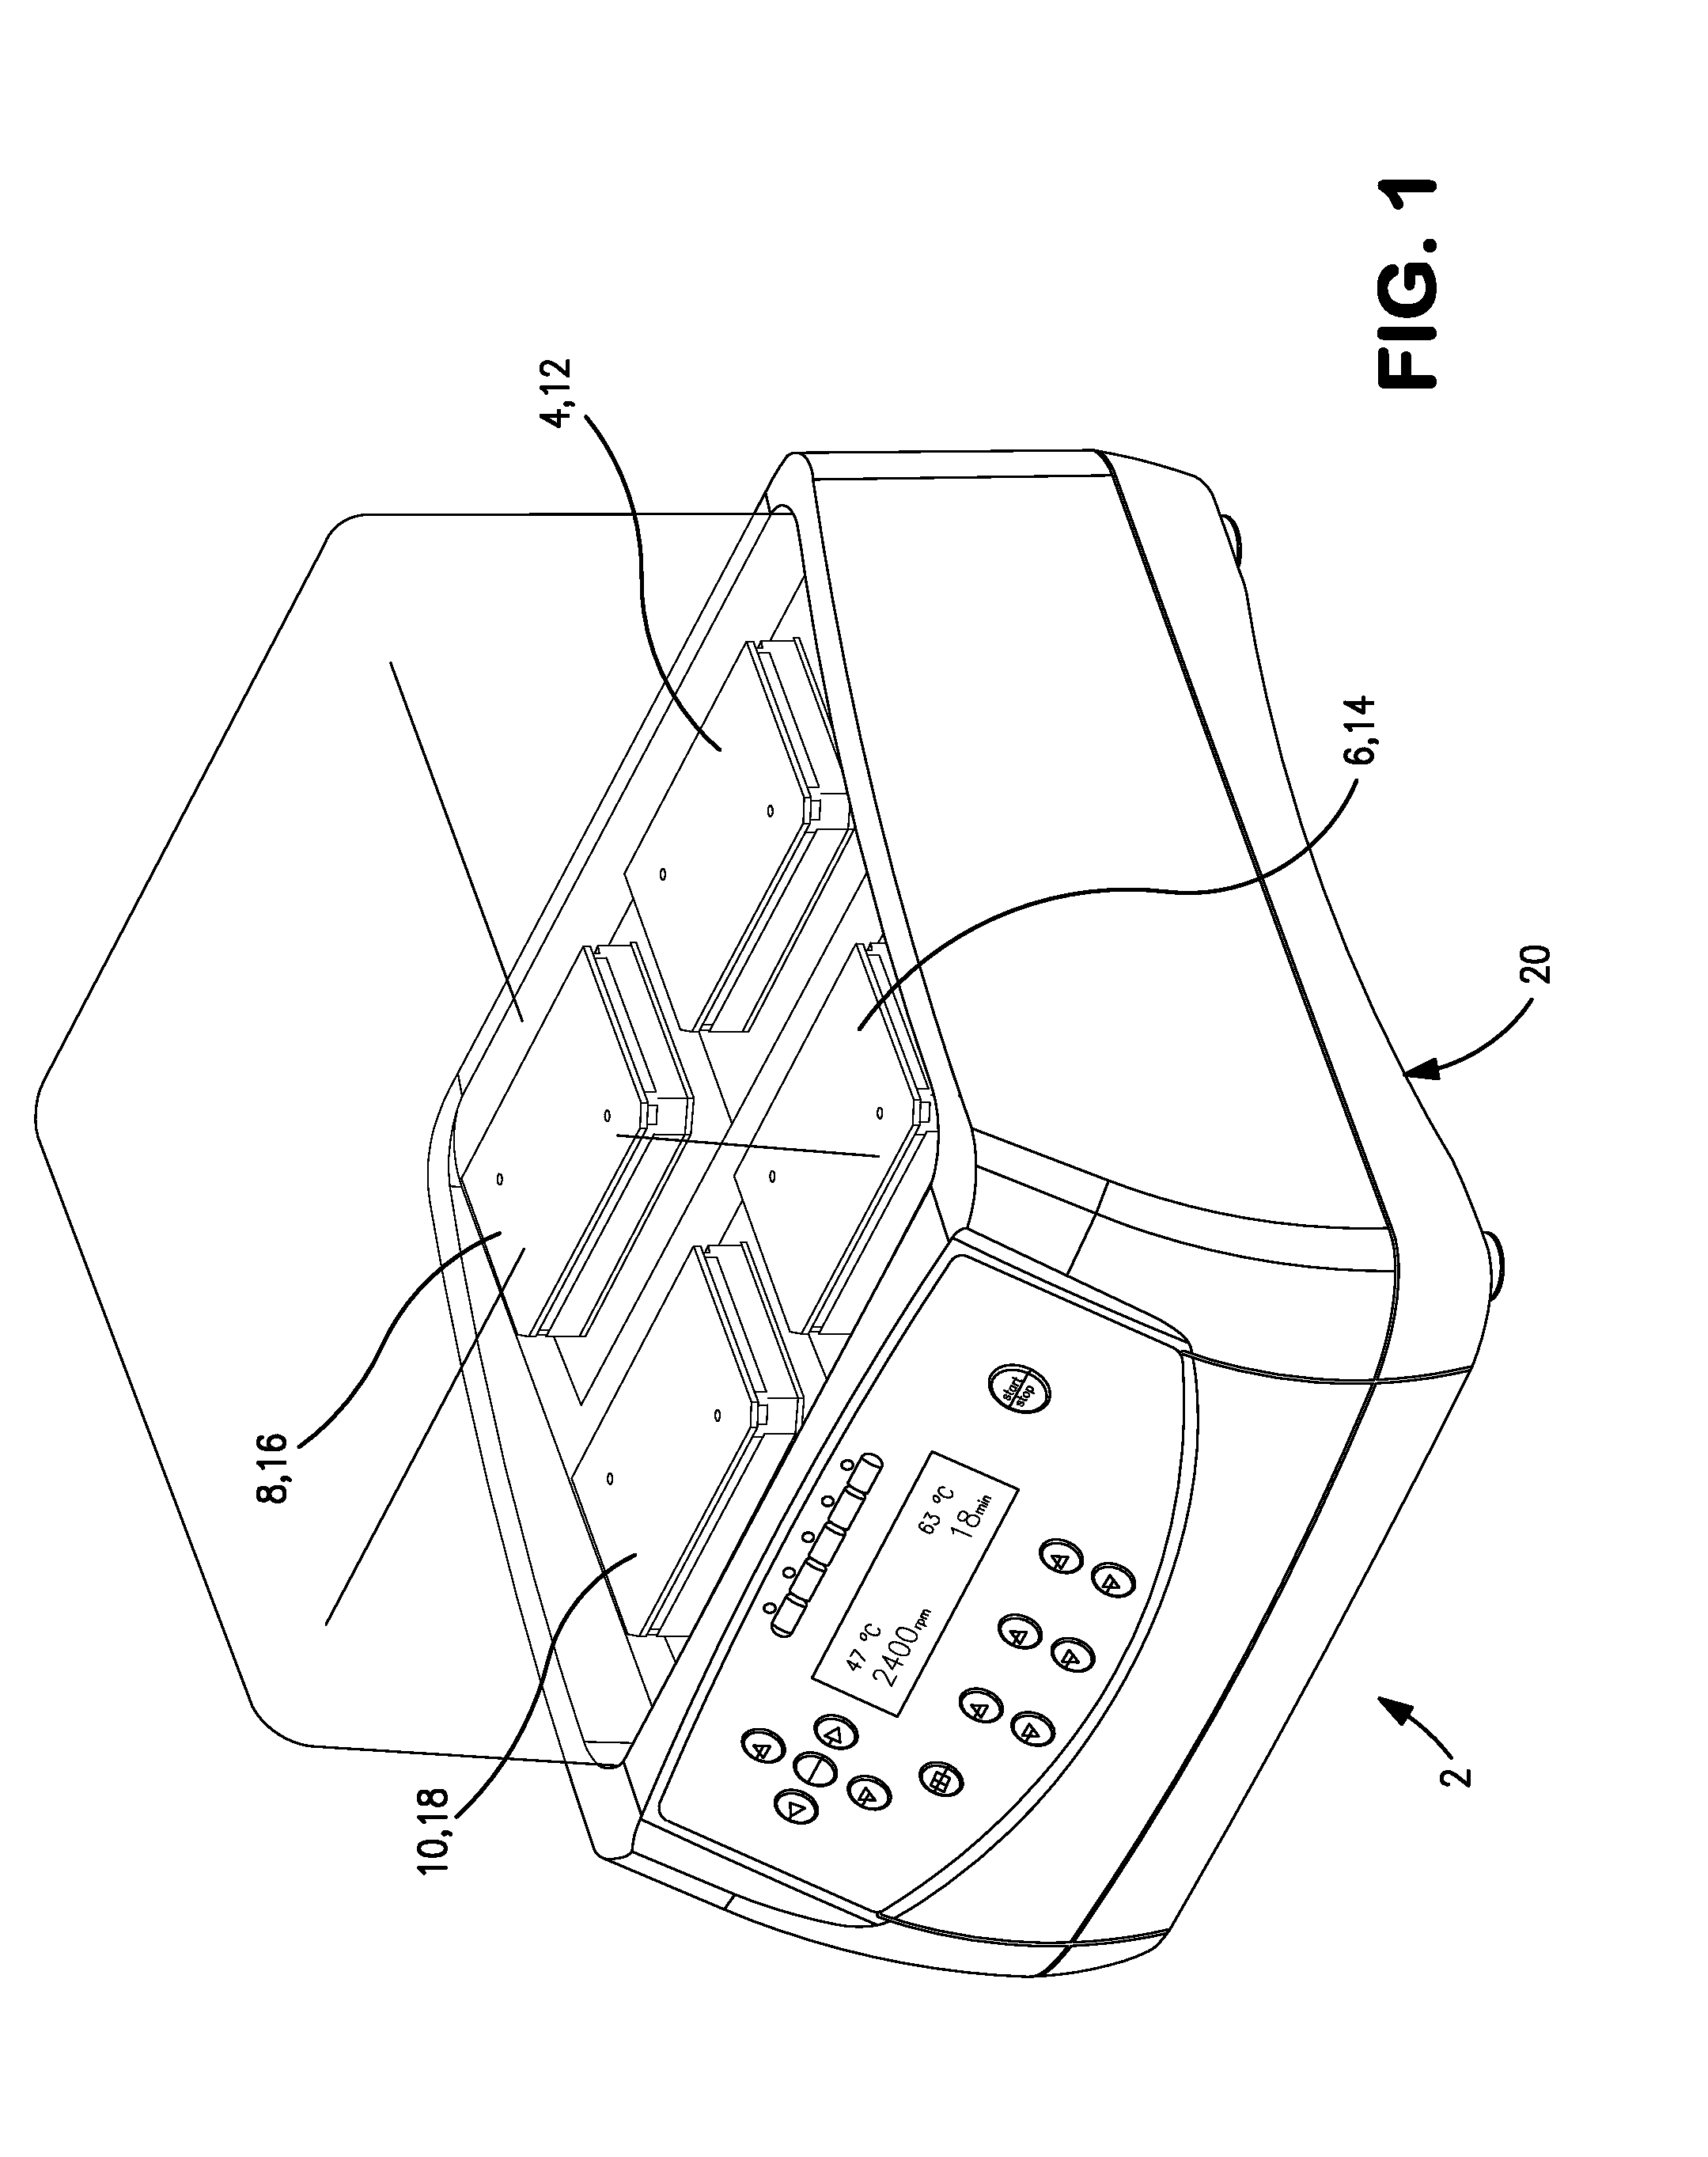 Multistation device for mixing the contents of laboratory vessels